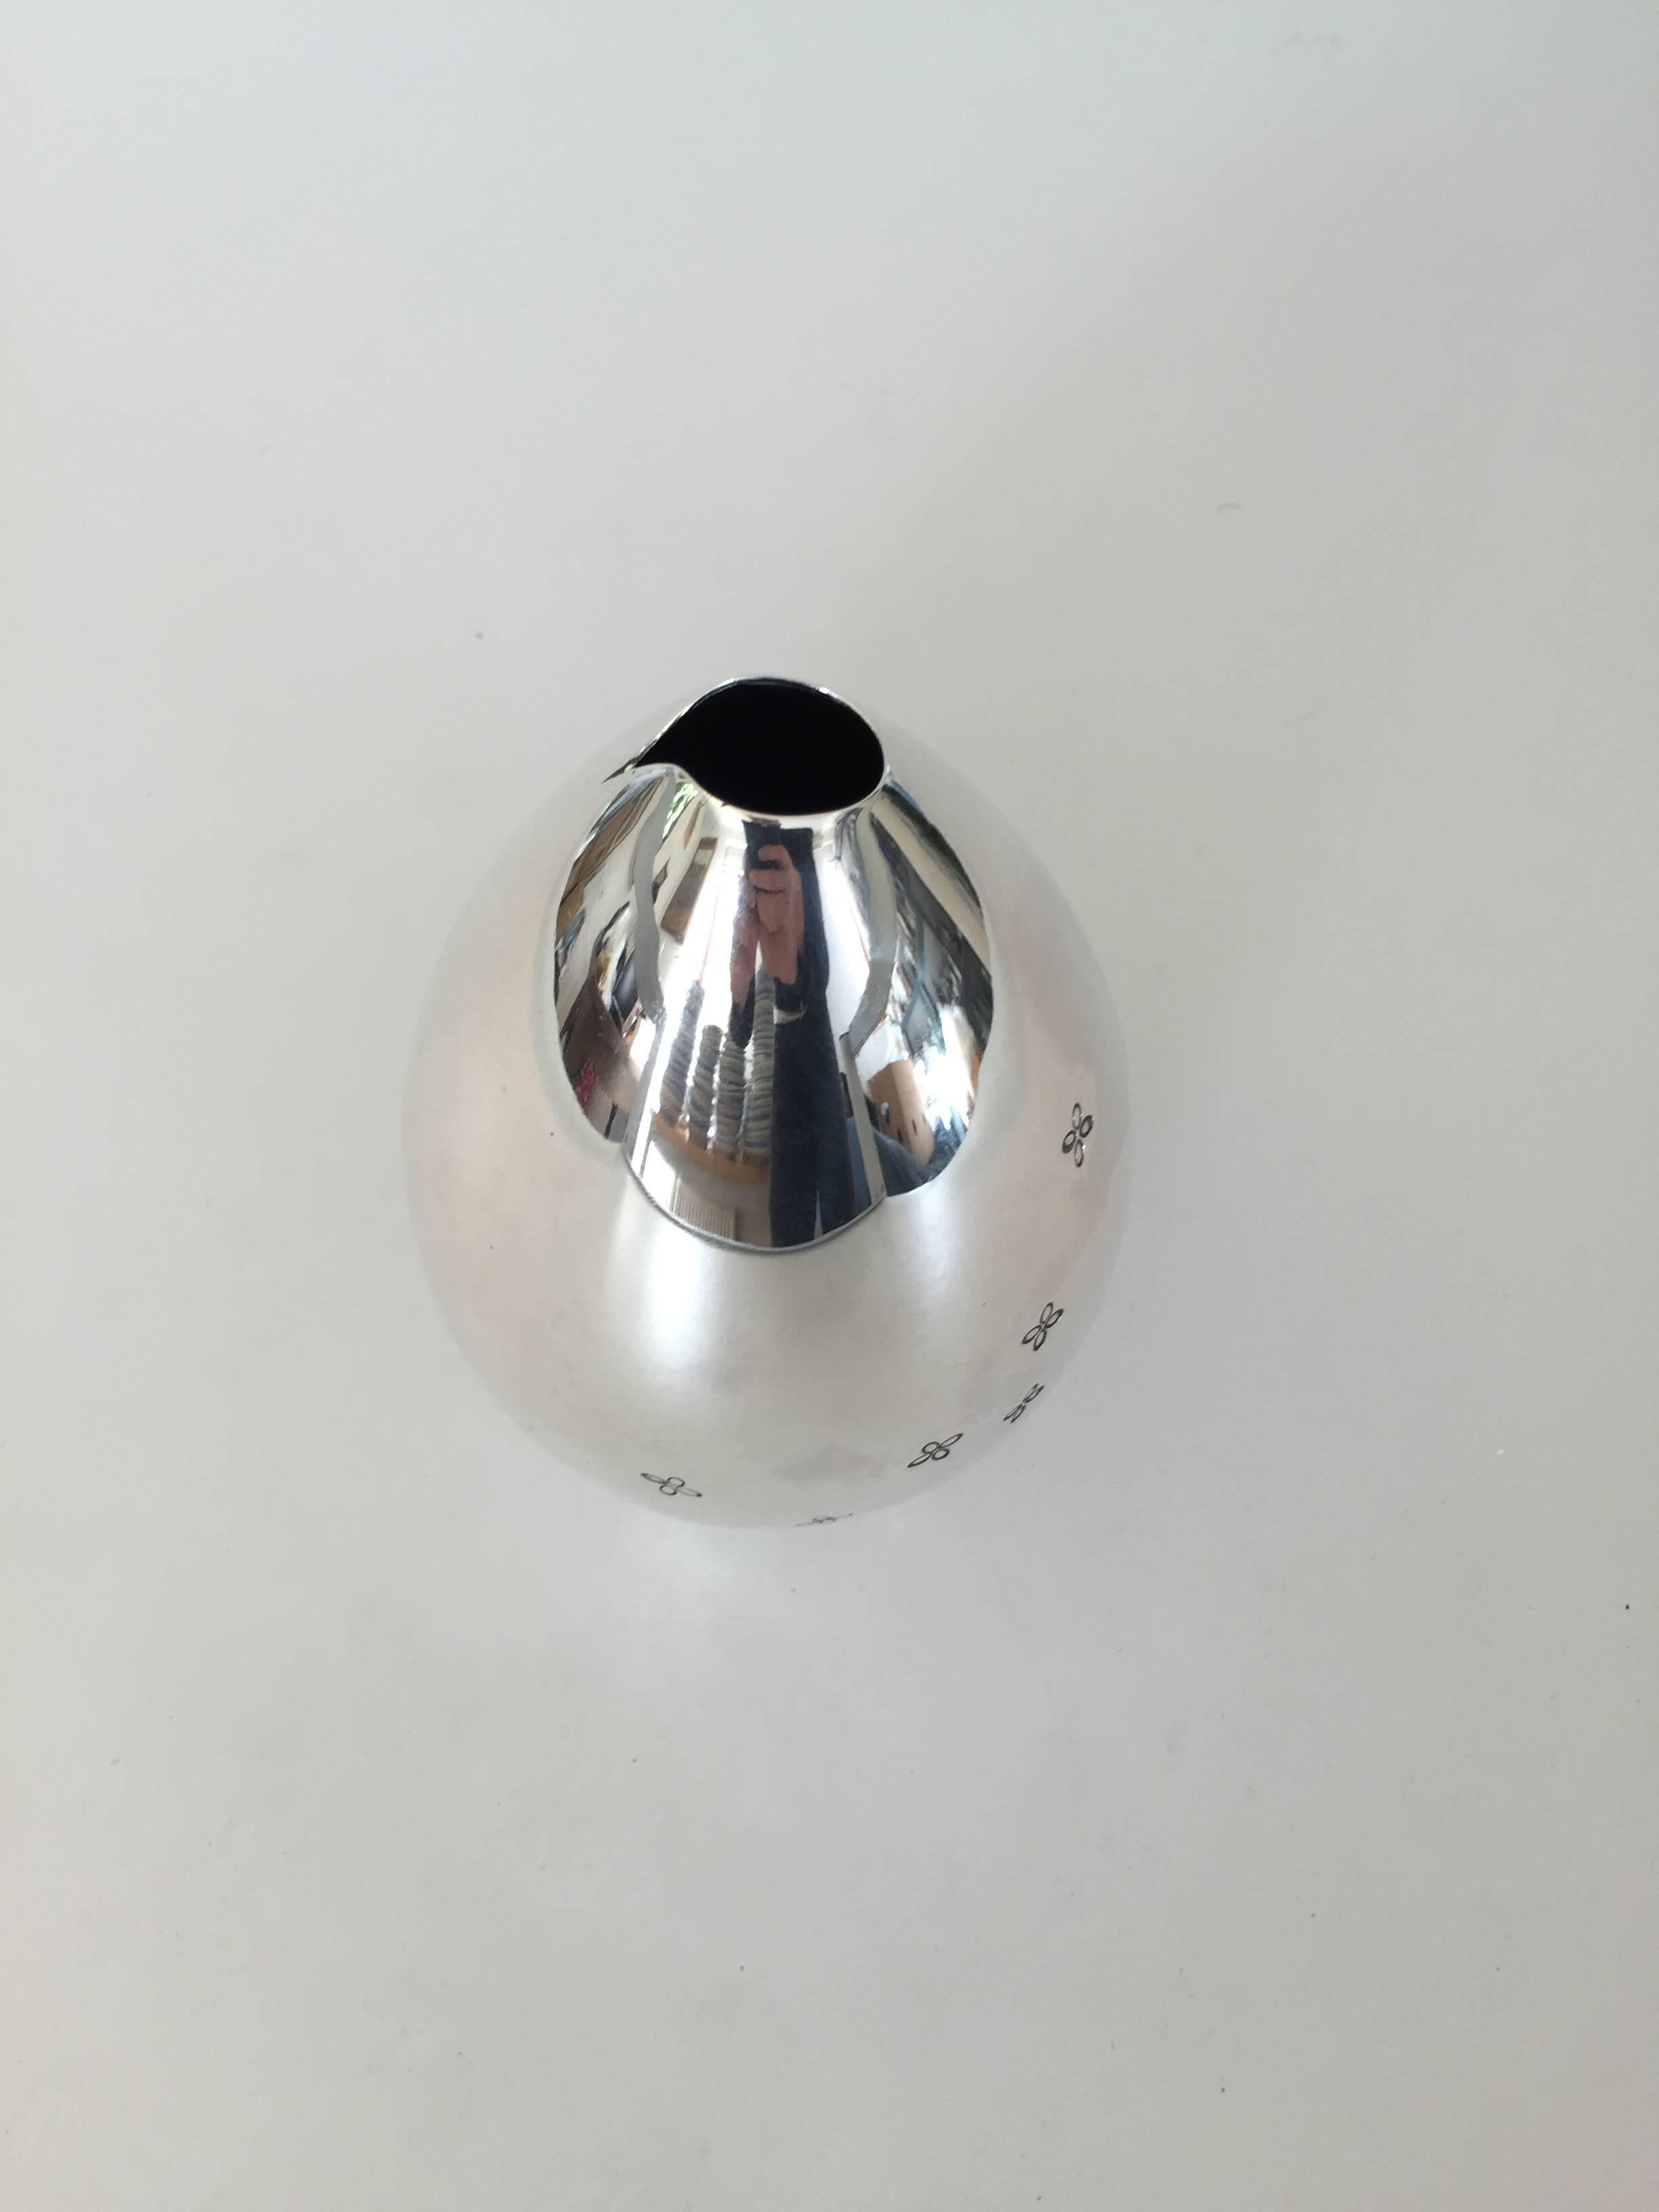 A. Dragsted vase in sterling silver. The measures 13 cm and is in a good condition.

Dragsted is a Danish jeweler and silversmithy known for its excellent craftmanship. The company was founded in 1854 and now specializes in both vintage and highly